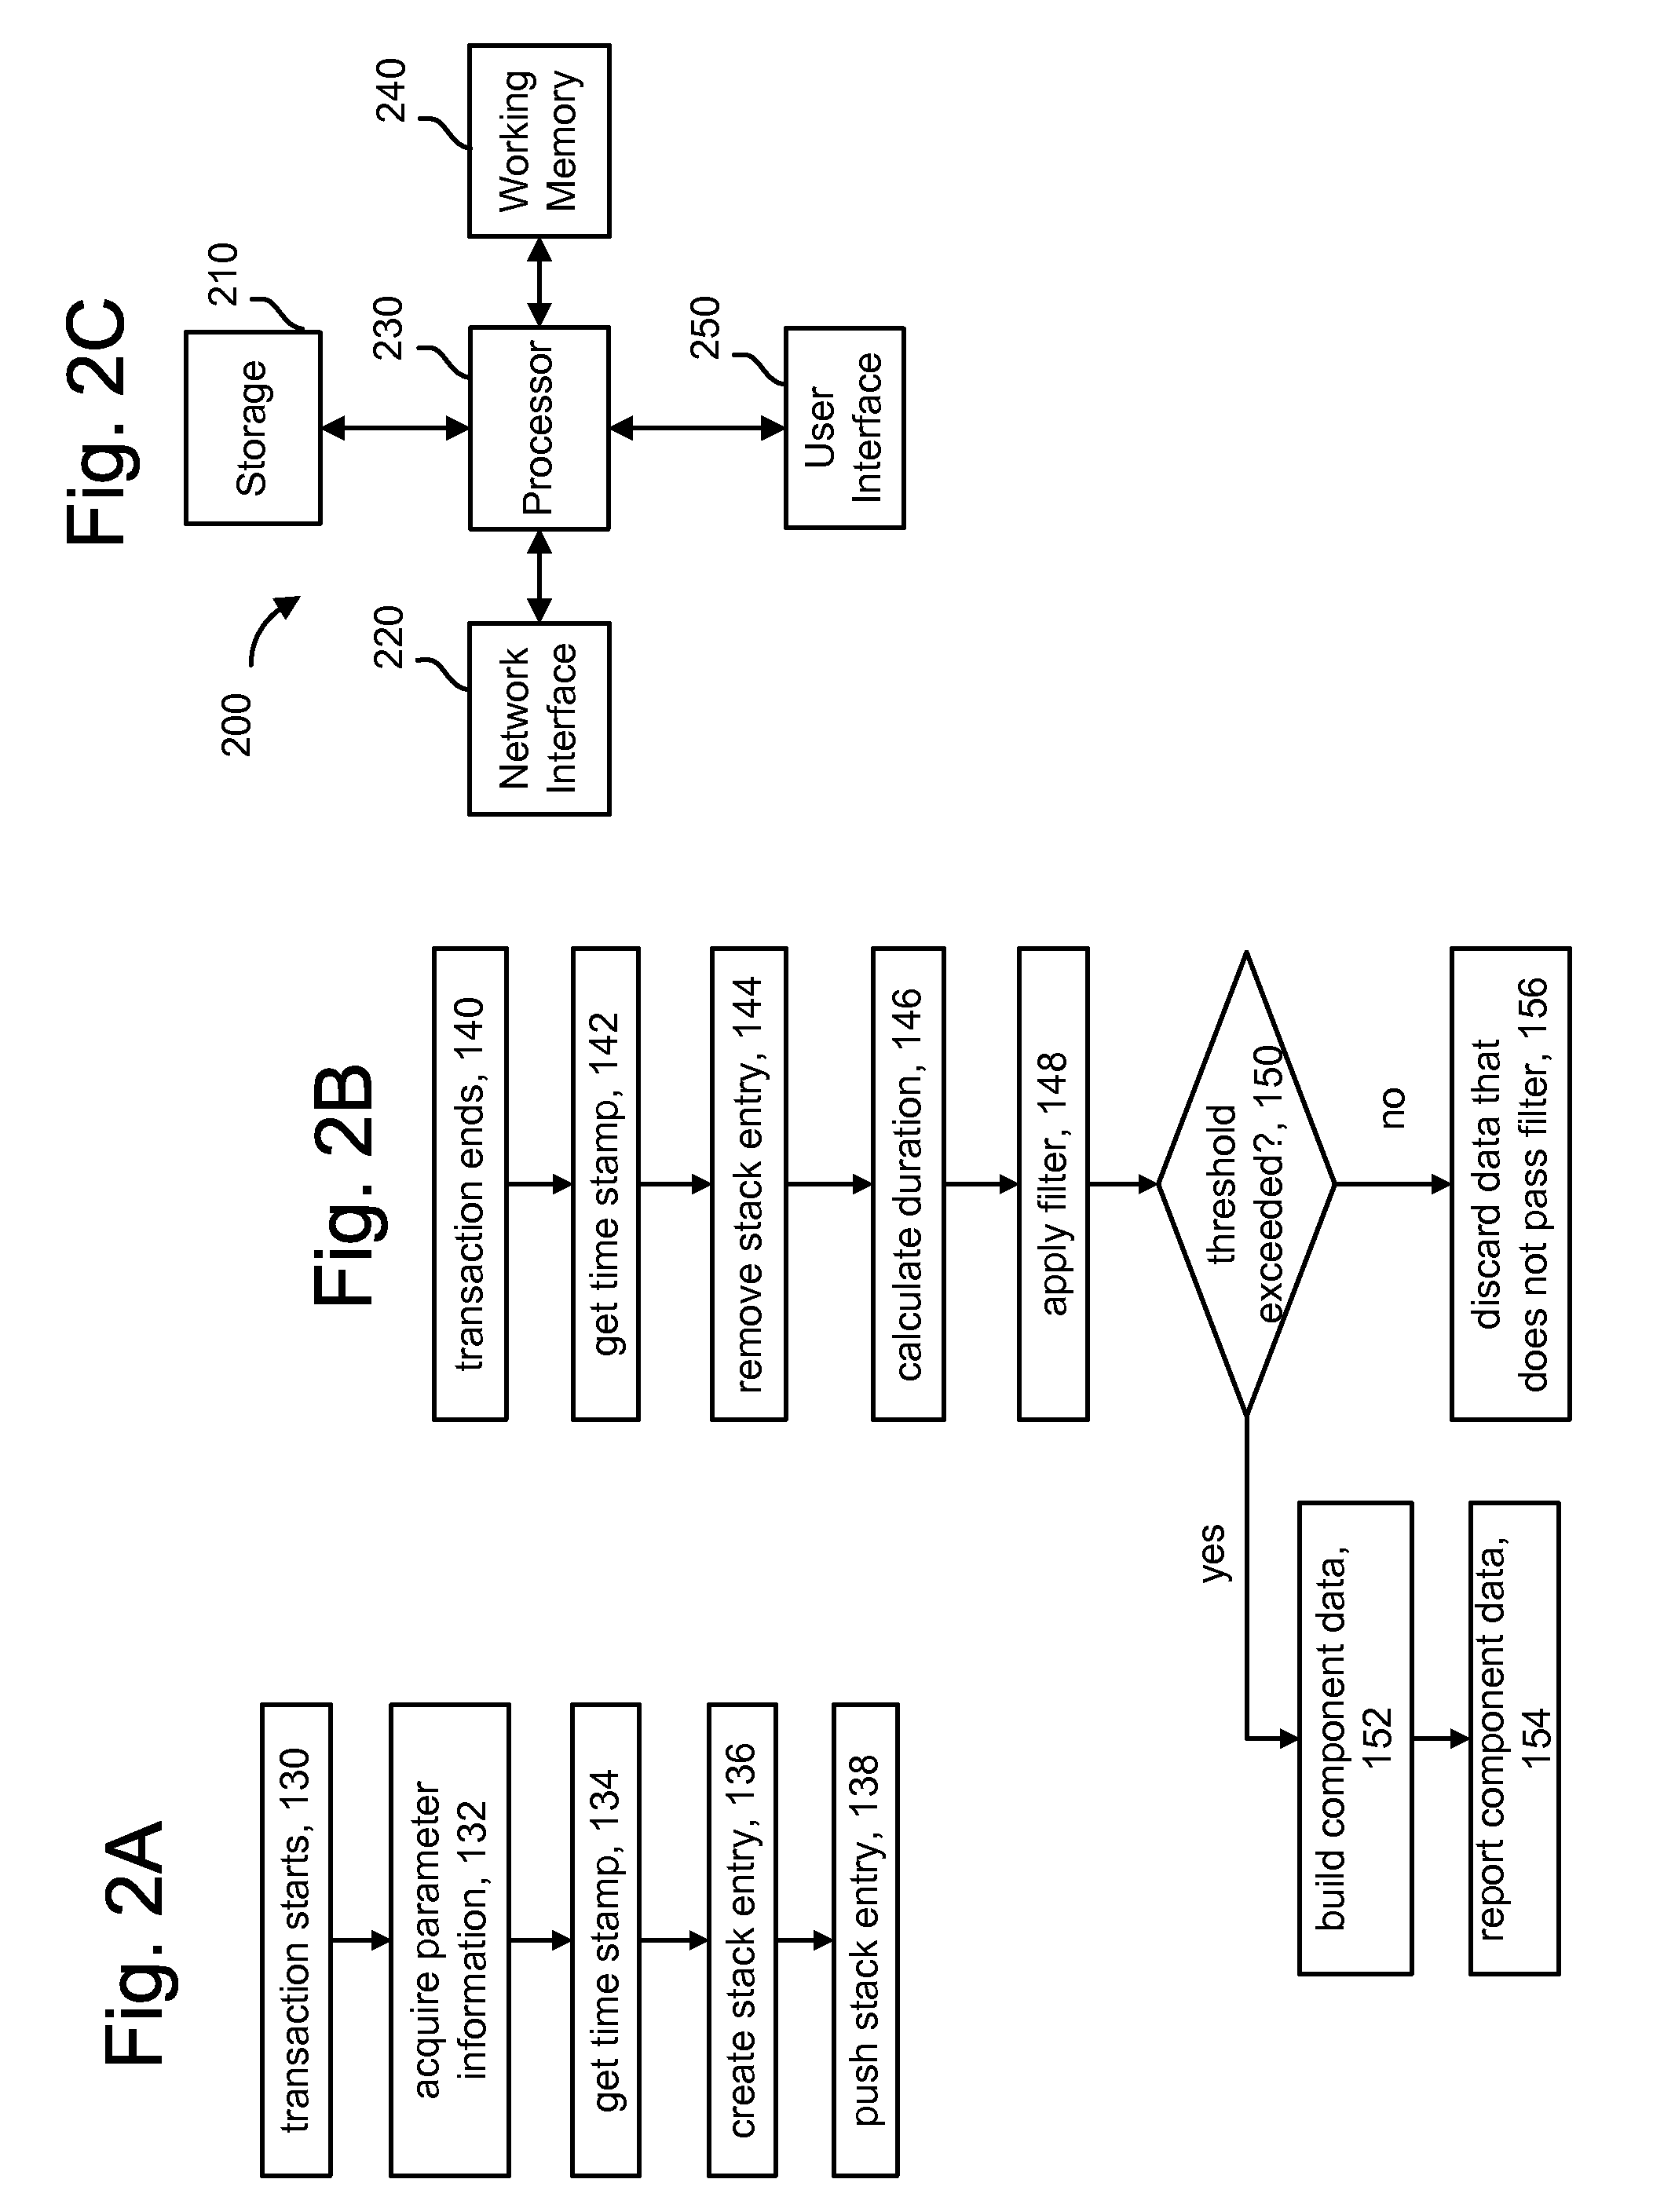 Transaction Model With Structural And Behavioral Description Of Complex Transactions